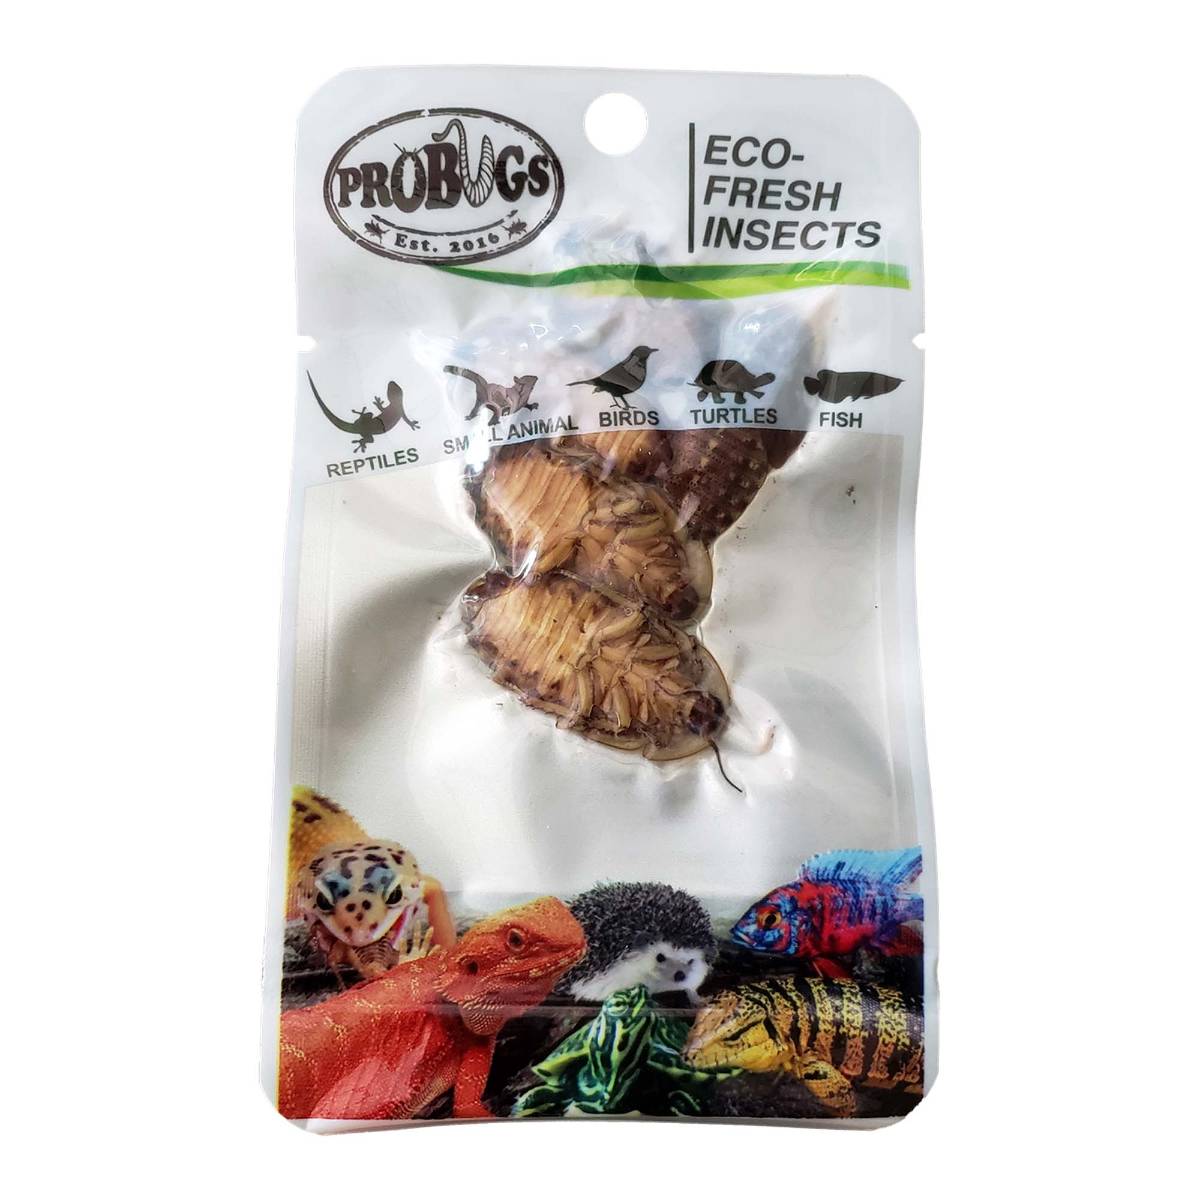  Freshinsects Premium Live Superworms - Bearded Dragon